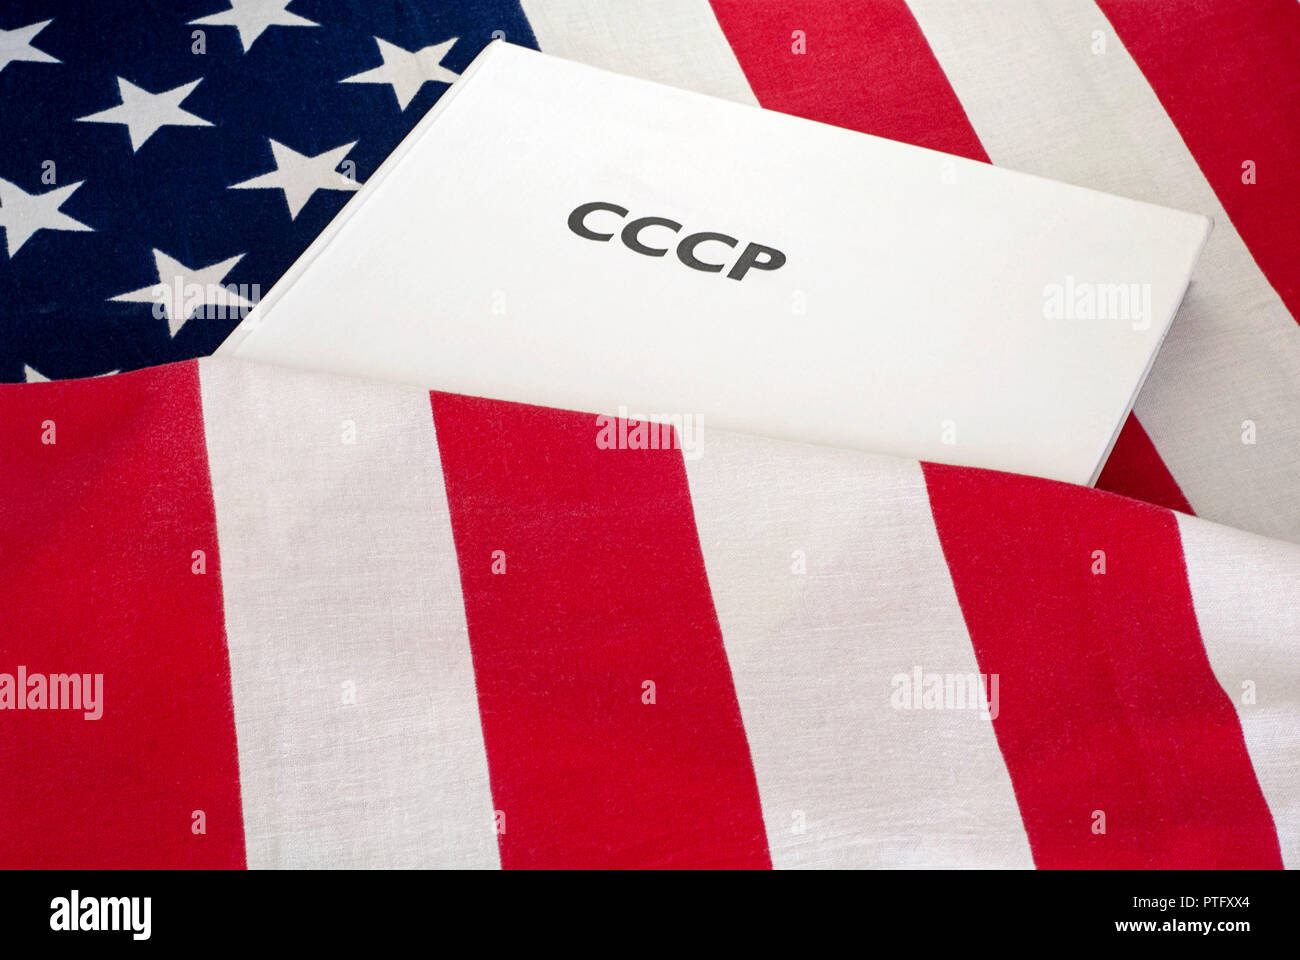 cold war  USA and USSR, CCCP written on the book, flag baground Stock Photo